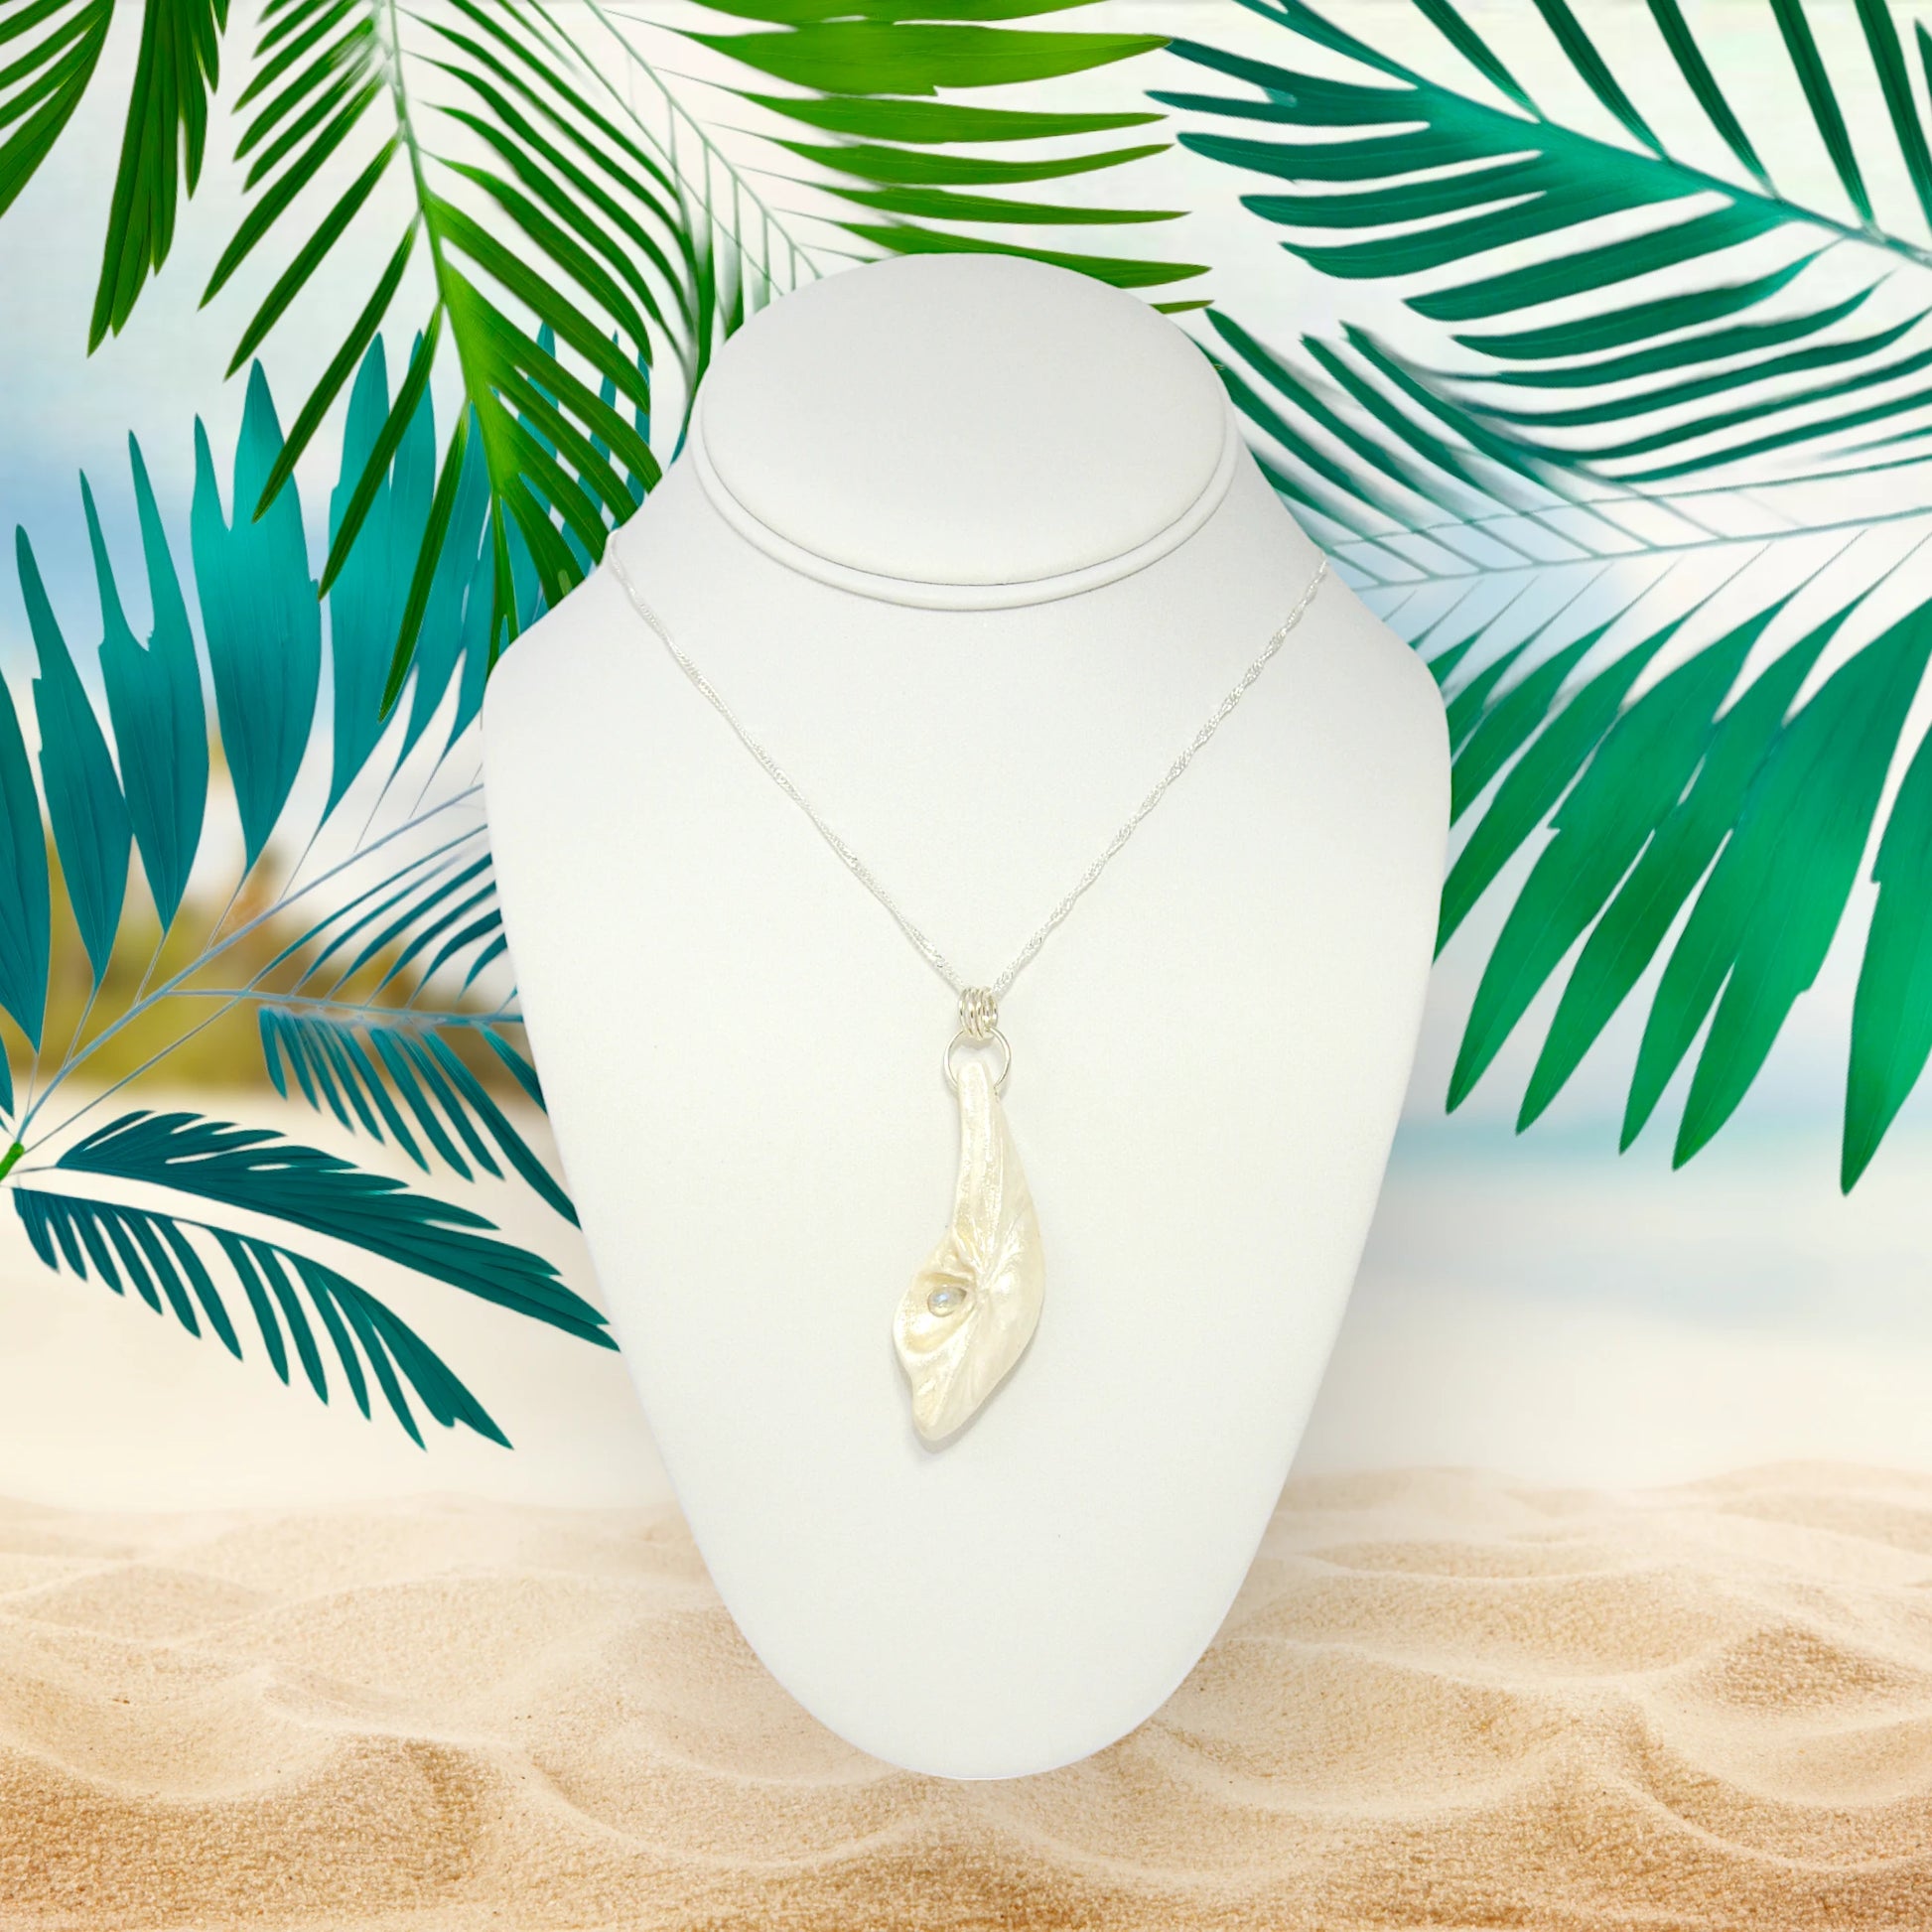 Cool Summer pendant made of natural seashell with a tear drop shape rose cut labradorite gemstone. The pendant is shown on a white necklace displayer.  The background is a sandy beach with greenery behind the display.